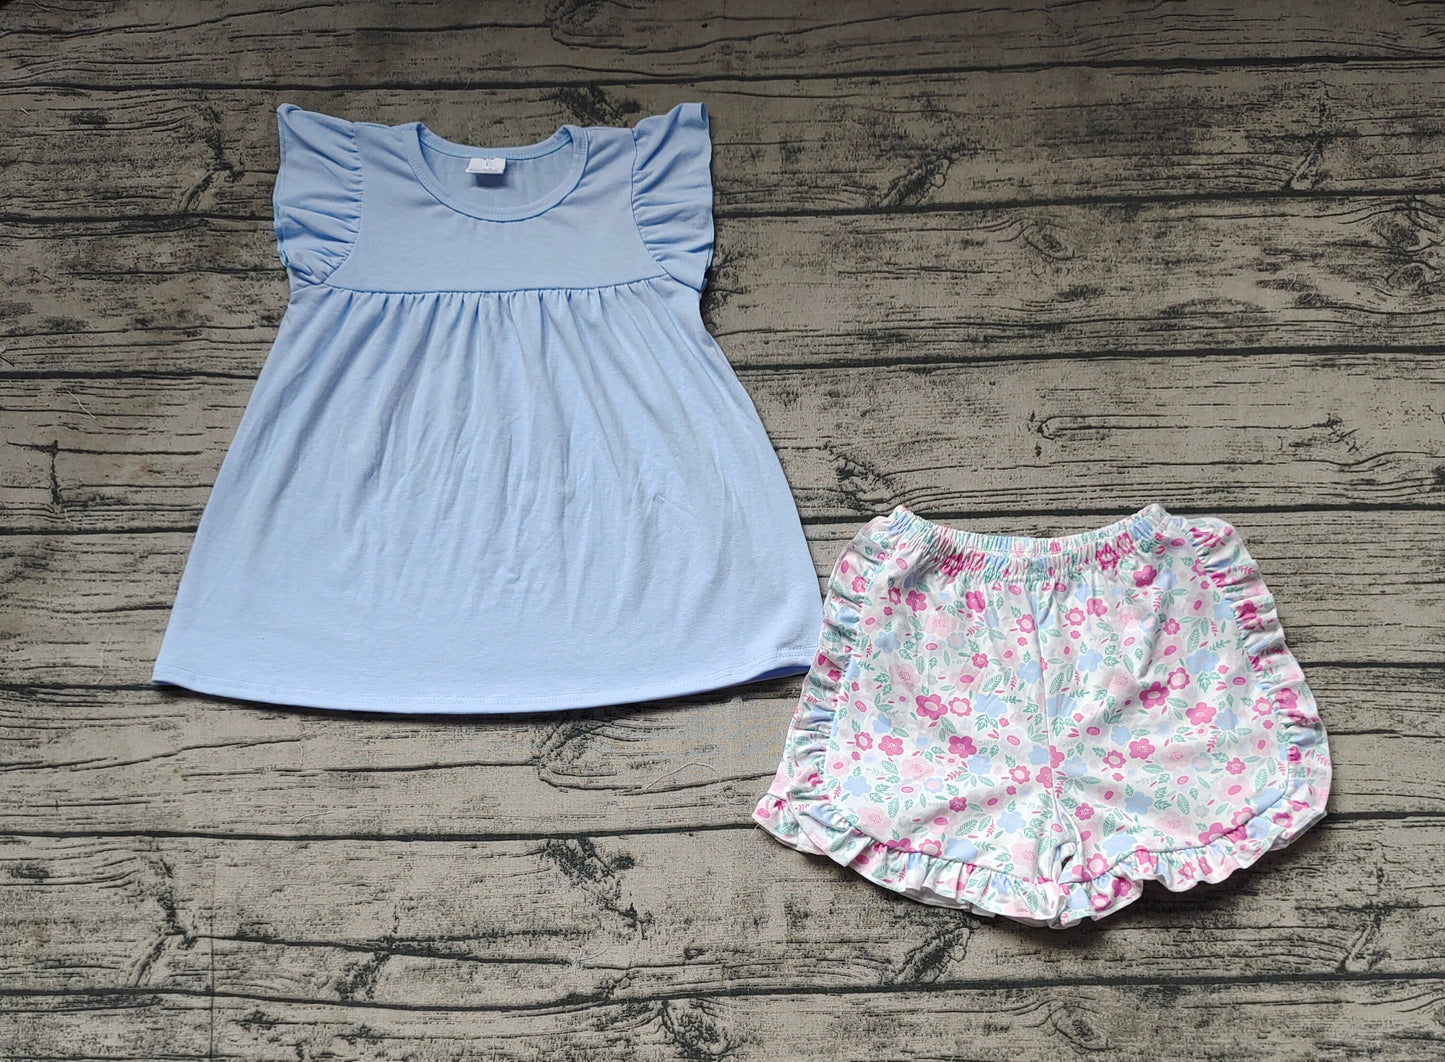 GSSO1056 Baby Girls Blue Pearl Tunic Top  Flower Ruffle Shorts Outfit